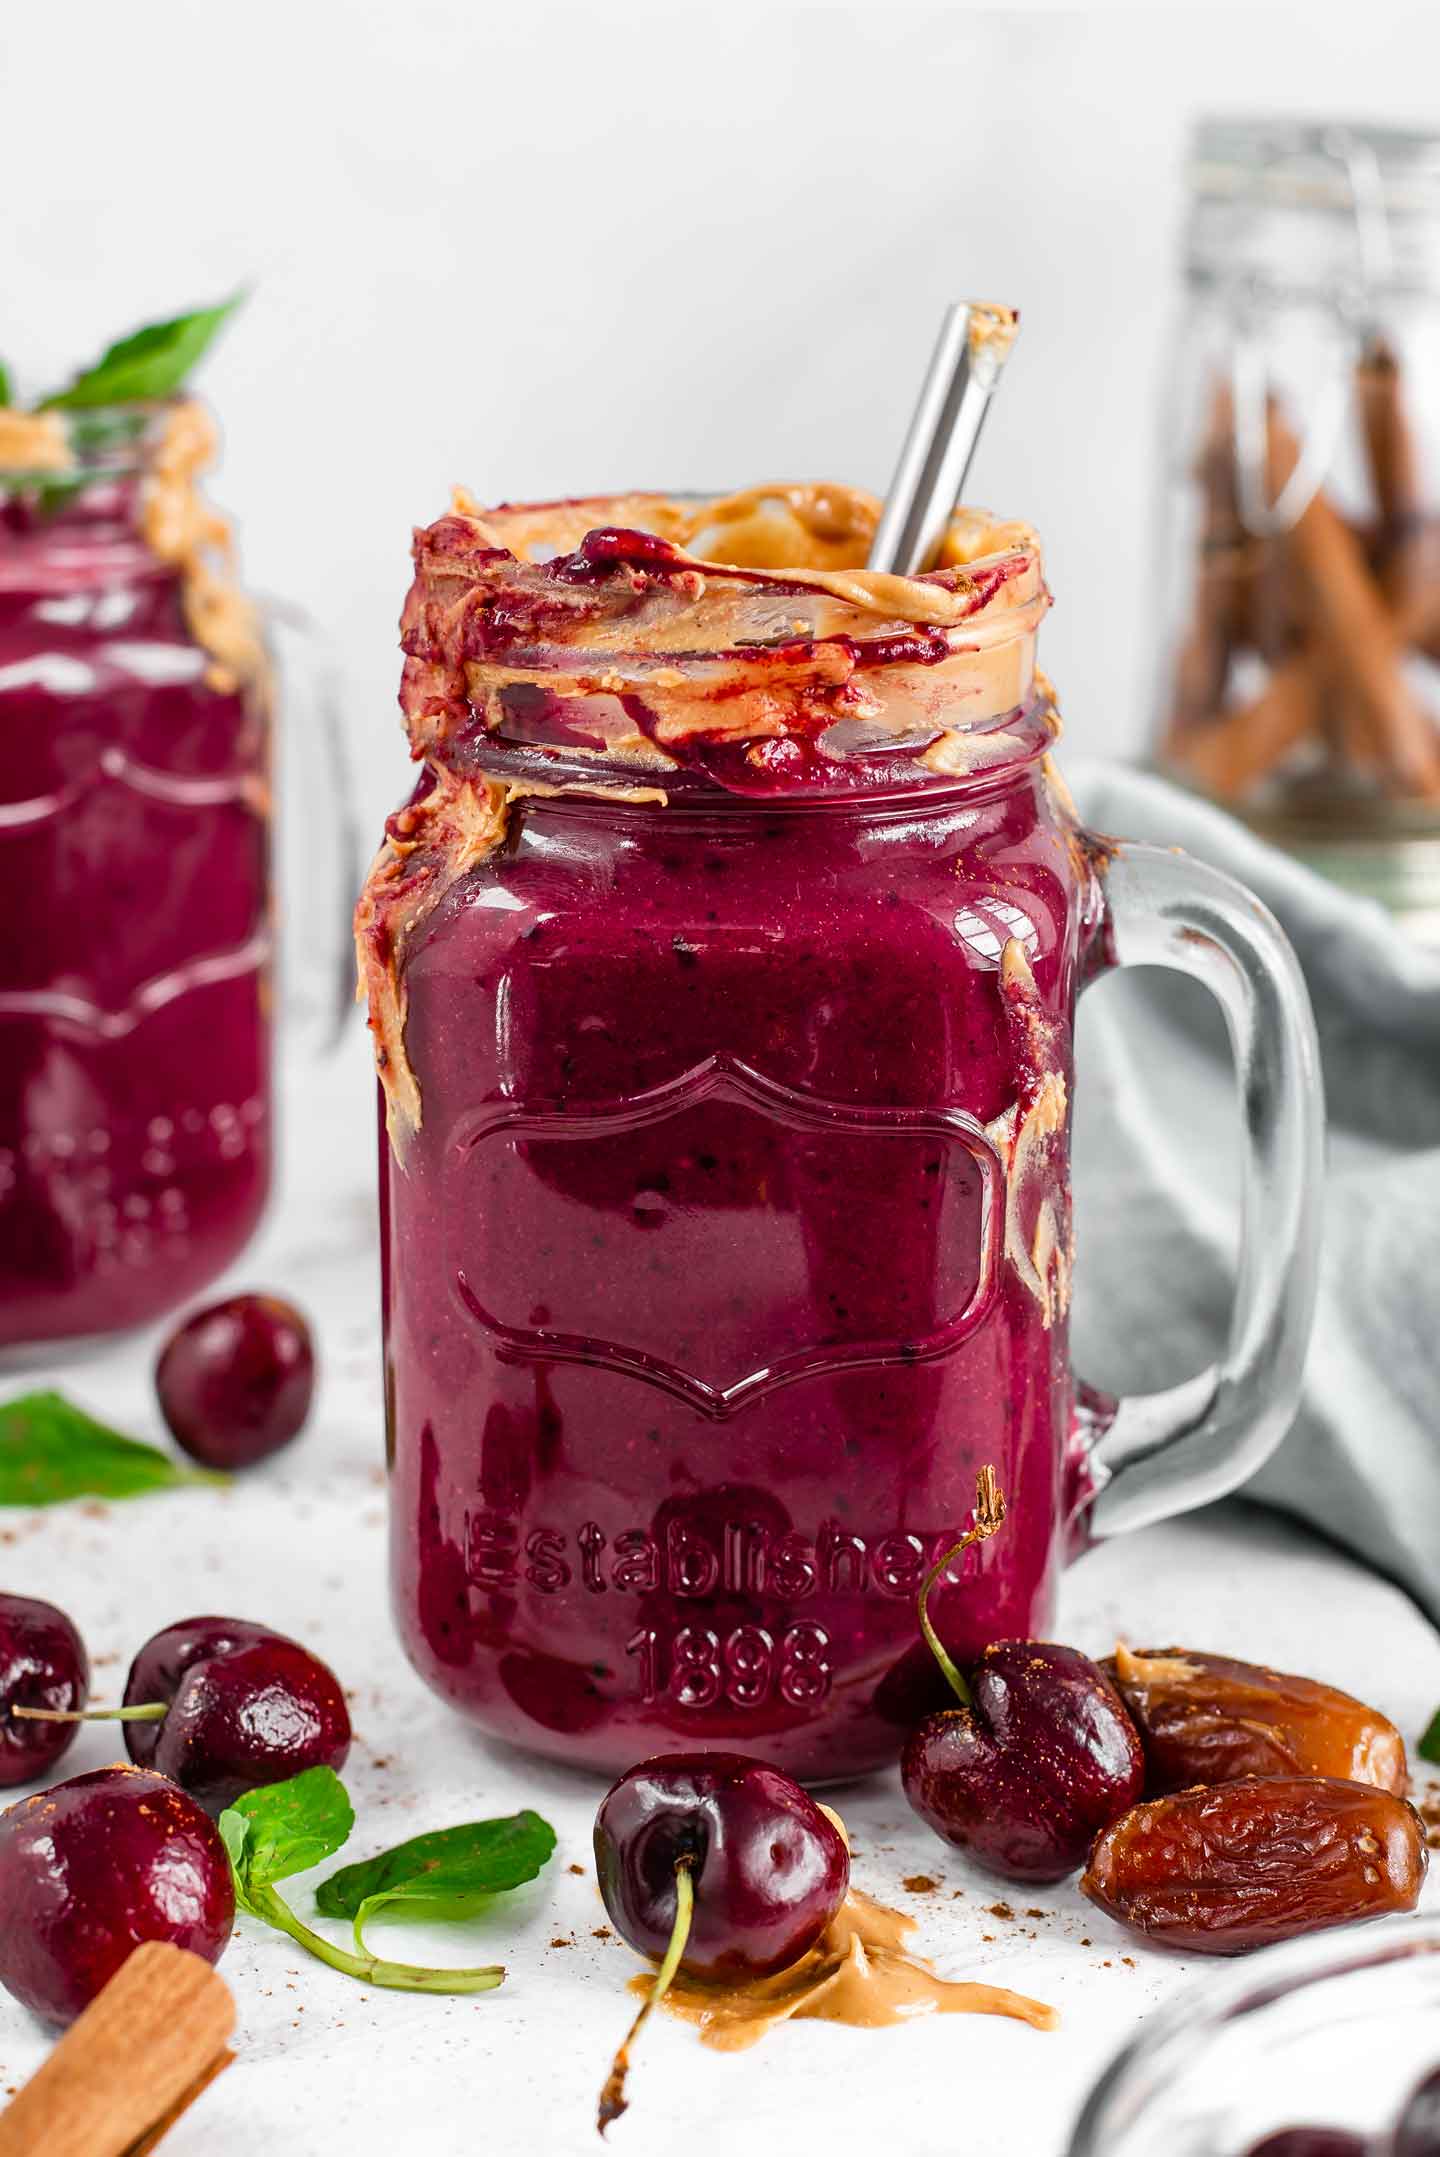 Side view of chocolate beet smoothie in a glass jar smeared with peanut butter. Another smoothie fills the background and cherries, dates, cinnamon sticks, and mint leaves are scattered around.